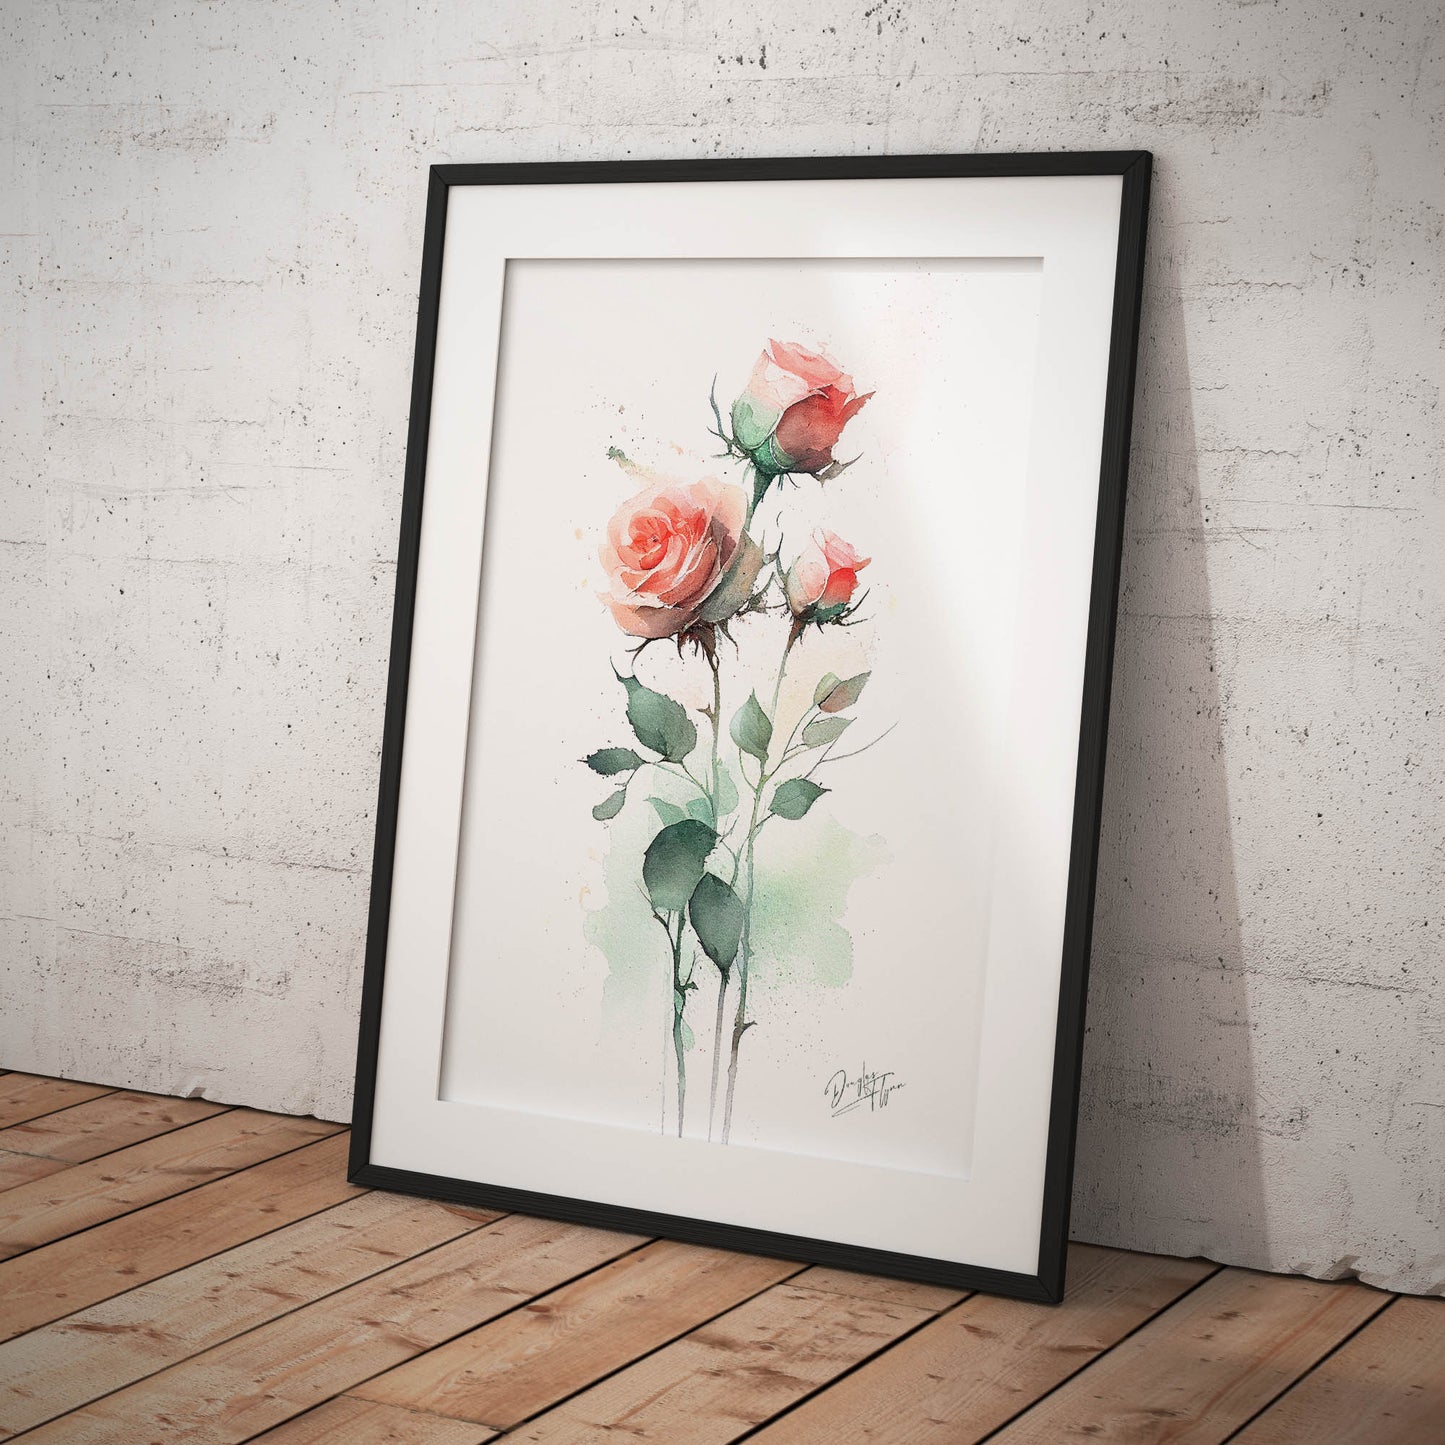 »Rose Waves of Colorful Serendipity« retro poster